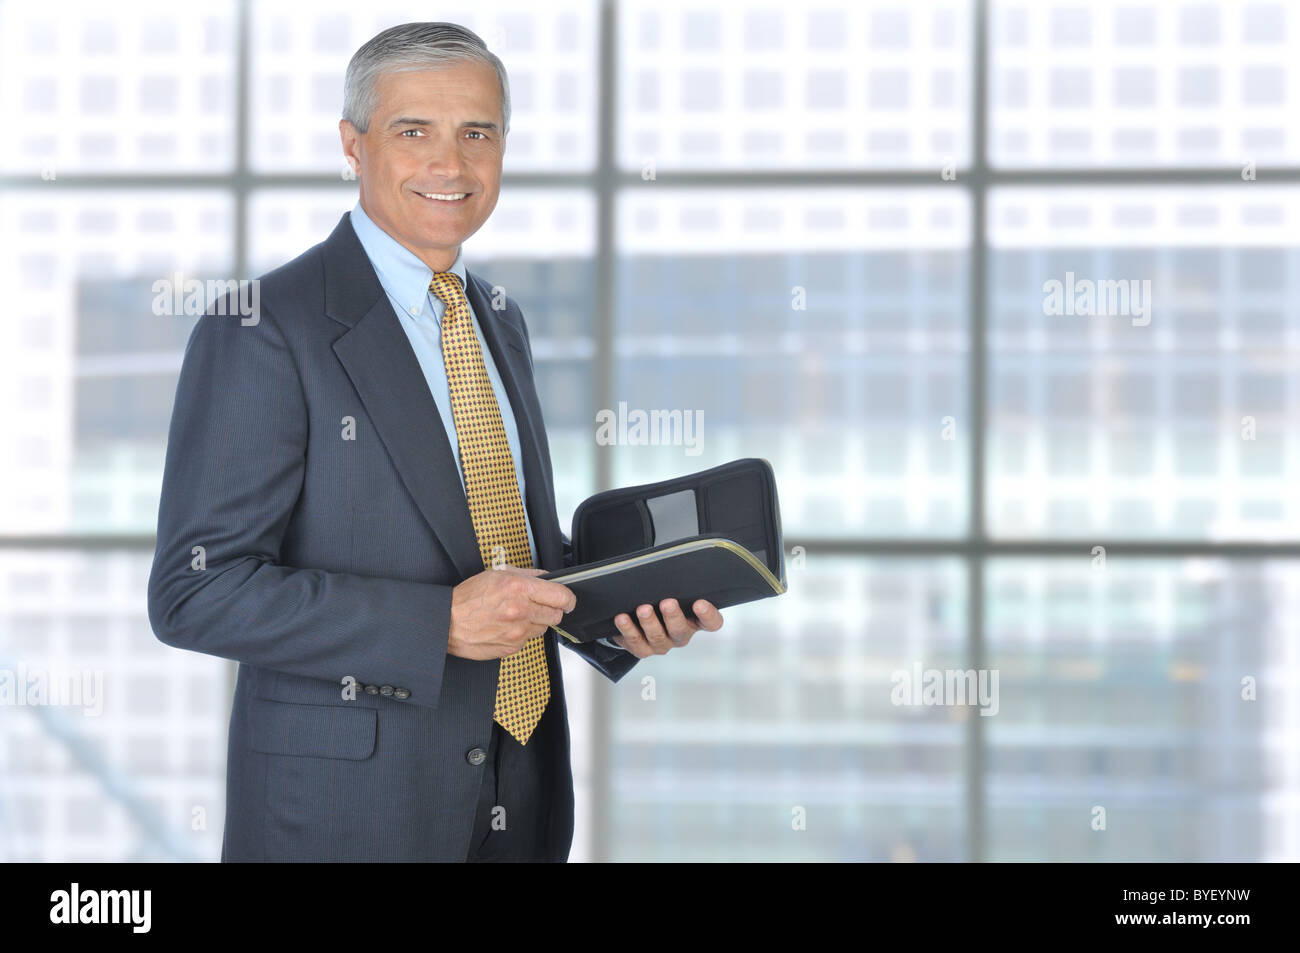 Standing Middle Aged Businessman with Planner Notebook in Modern Office Setting. Stock Photo